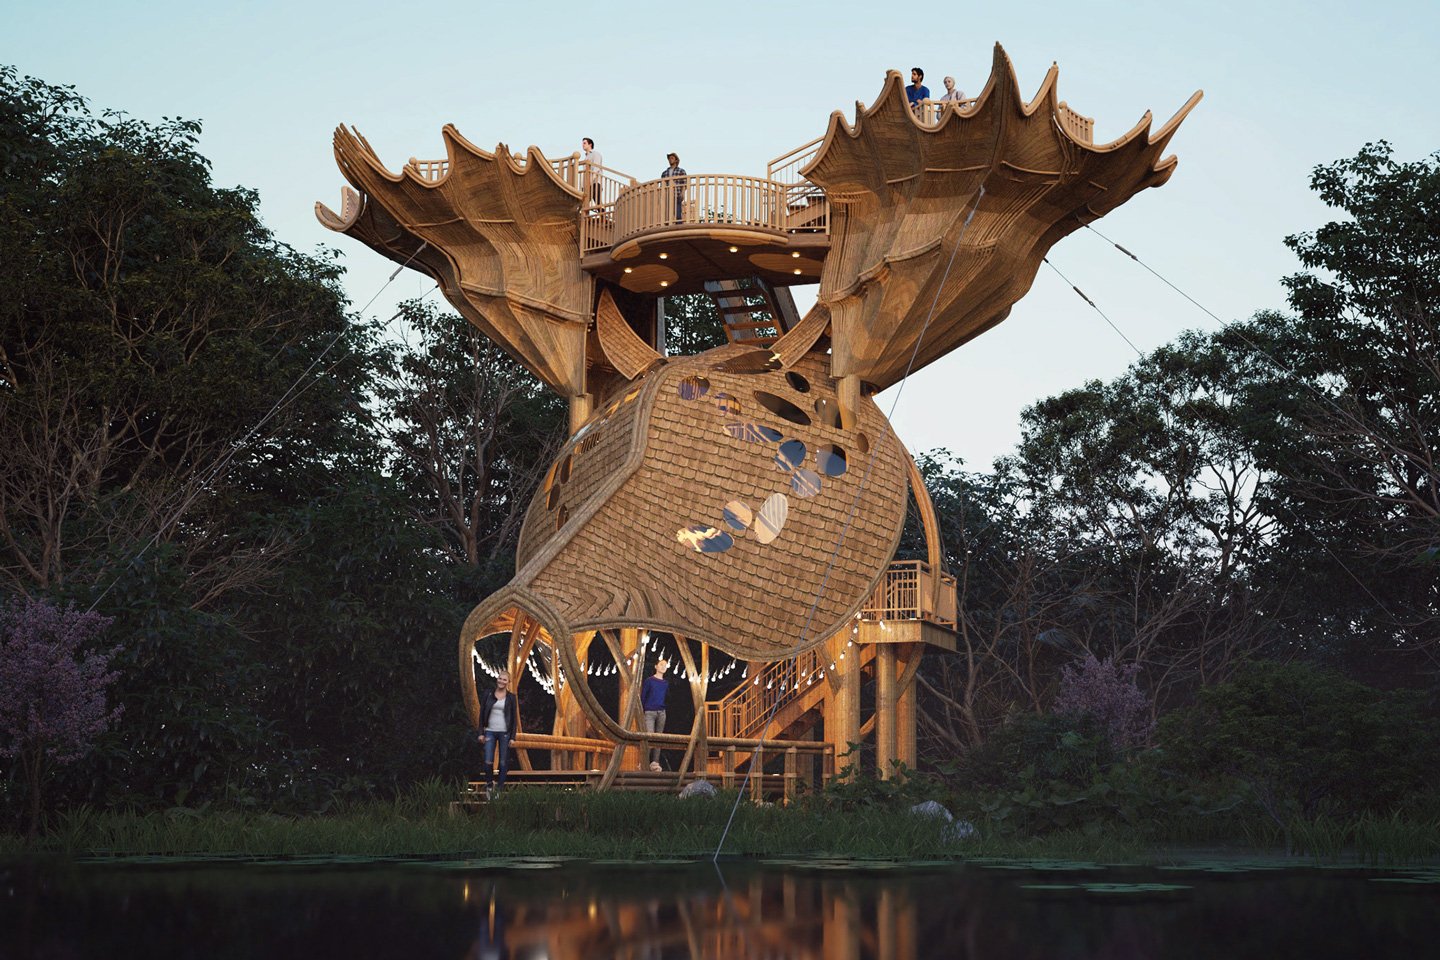 #Breathtaking forest observation deck is designed to look like a massive moose head